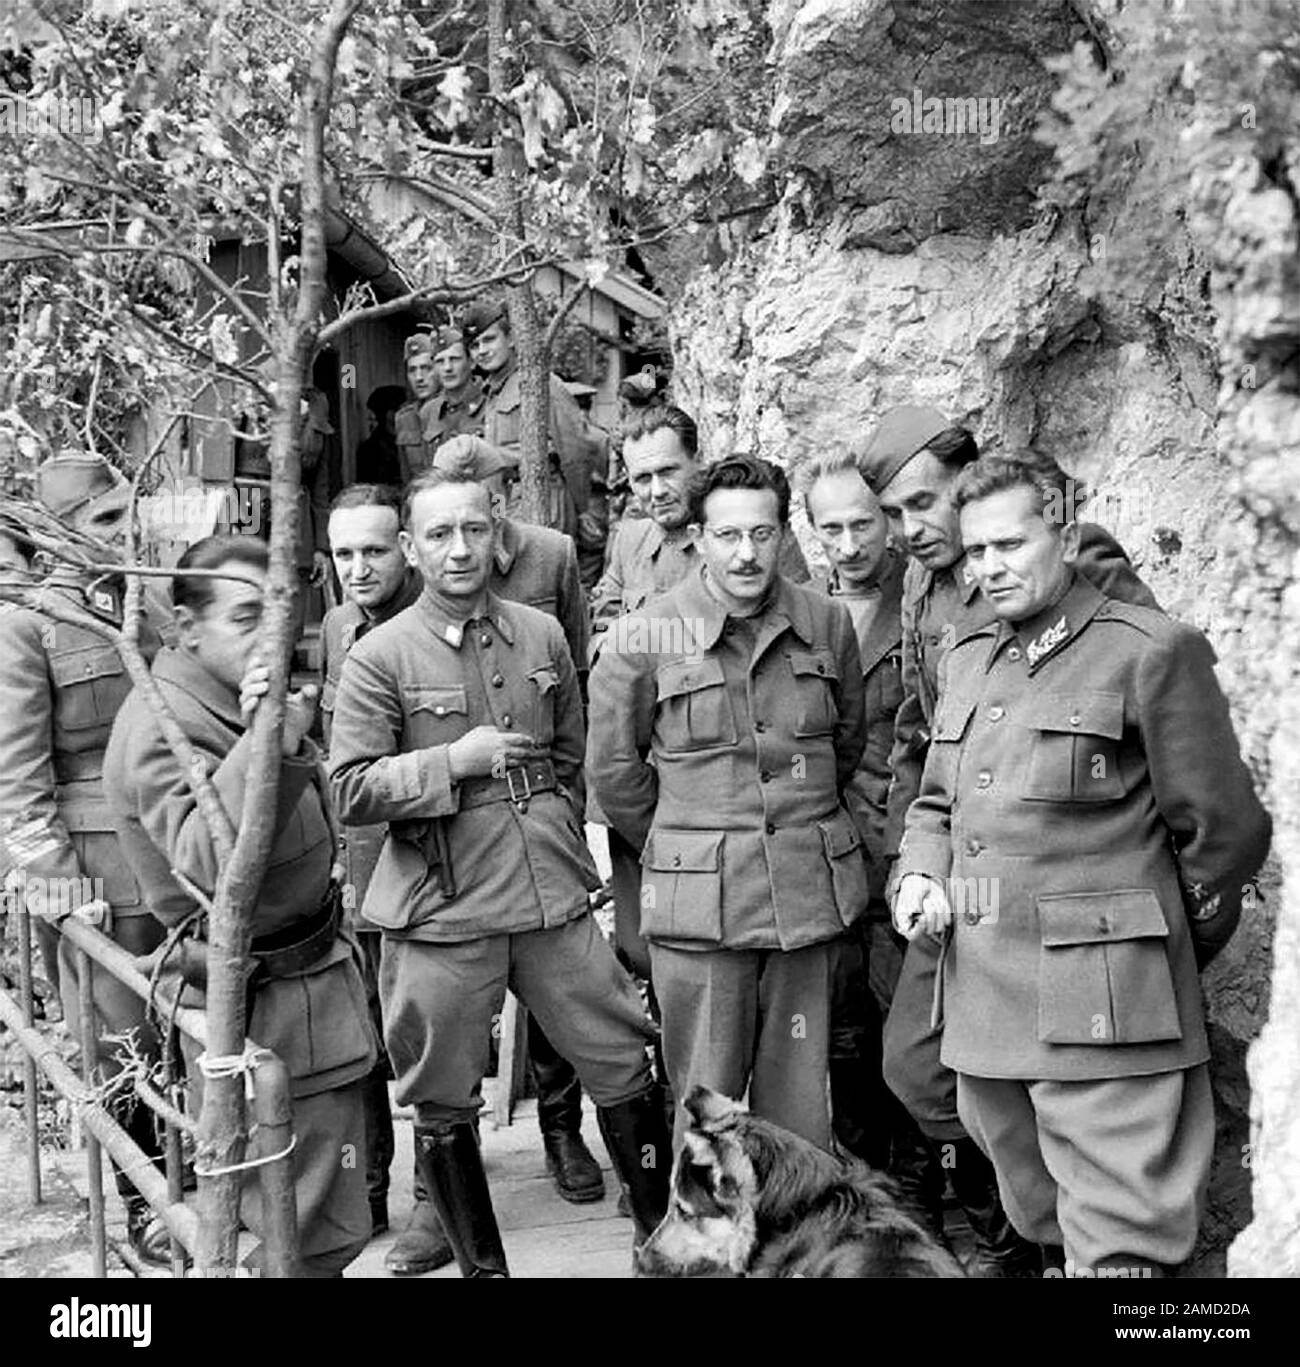 Marshal Tito stands with his Cabinet Ministers and Supreme Staff at his mountain headquarters in Yugoslavia on 14 May 1944. From left to right in the front row are Dr Vladimir Ribnikar (Minister of Information), Colonel Filipovich, Kdvard Kardelt and Marshal Tito. From left to right in the back row are Major General Arca Yovanovich (Chief of Staff), Radonja (Tito's secretary), Cholakovich (Secretary of the National Anti-Fascist Council), Kocbek (Minister of Education) and Lieutenant General Sreten Zujevich. Tito's dog, Tiger, can also be seen in the foreground. MAy 1944 Stock Photo